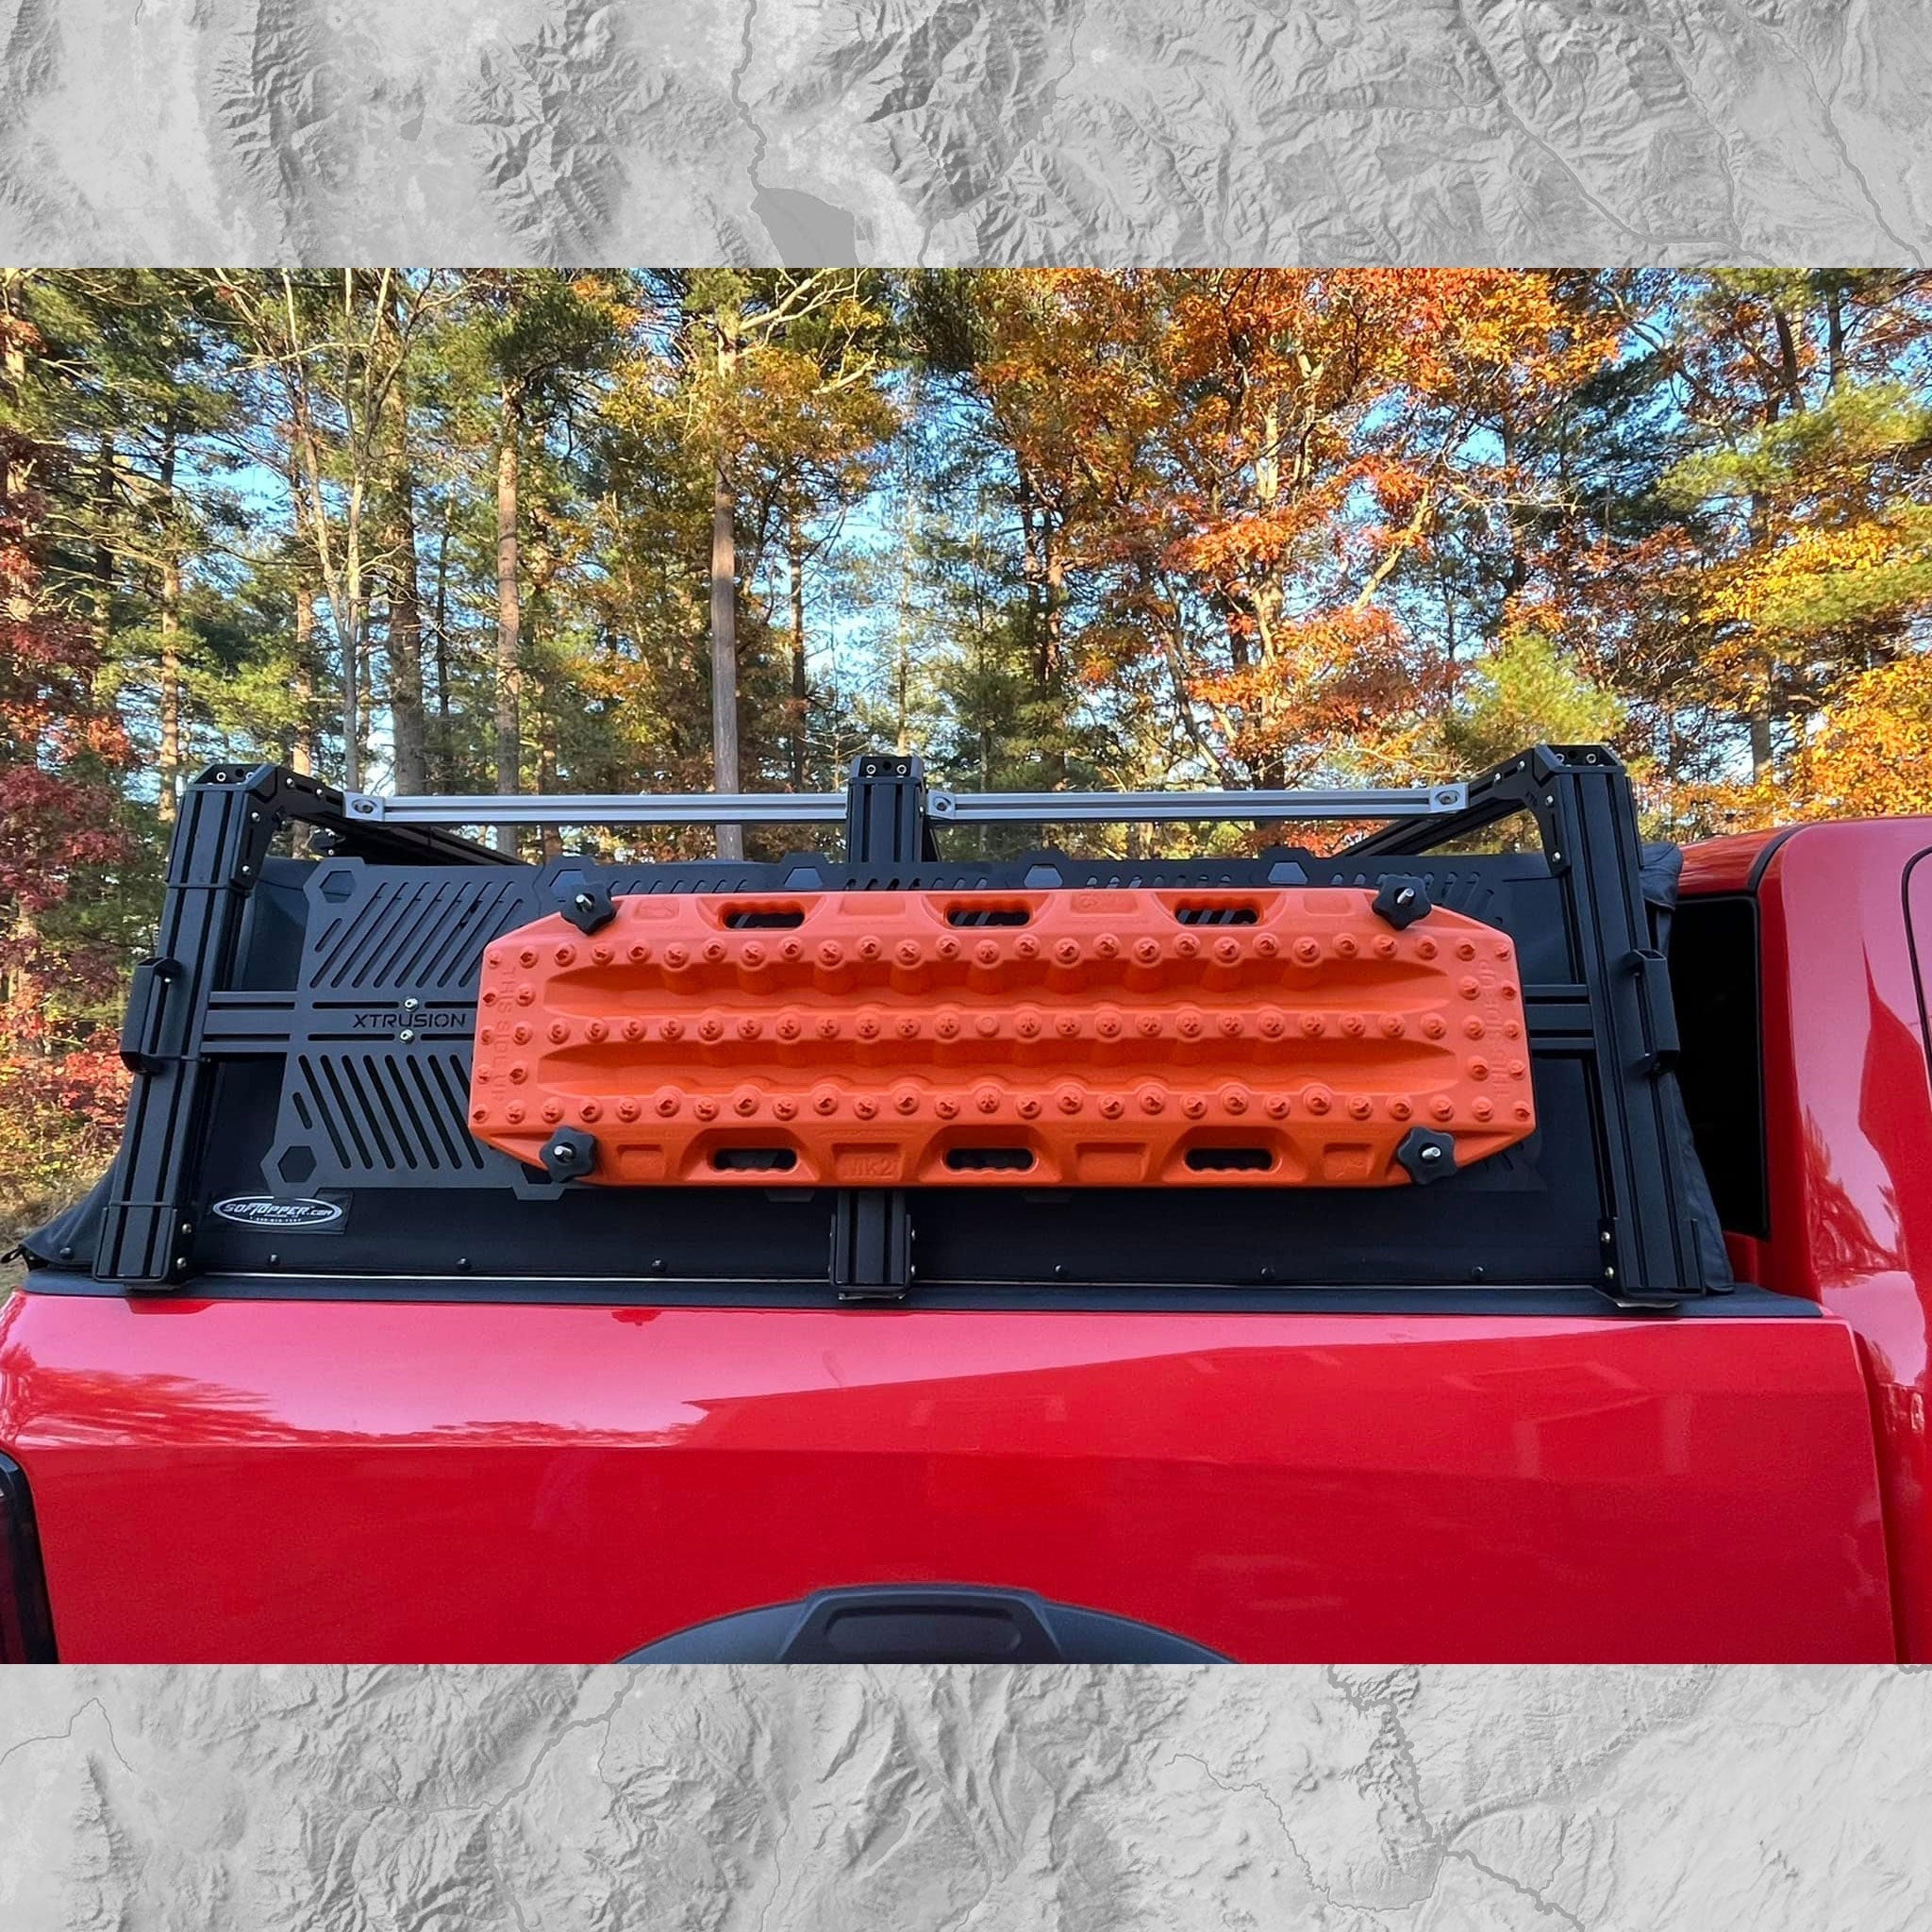 RAM 2500 Mounted XTR1 HD (Heavy Duty) with triple column uprights and 15 inch Xtrusion Molle panels. and Traction boards mounted to Bed Rack.